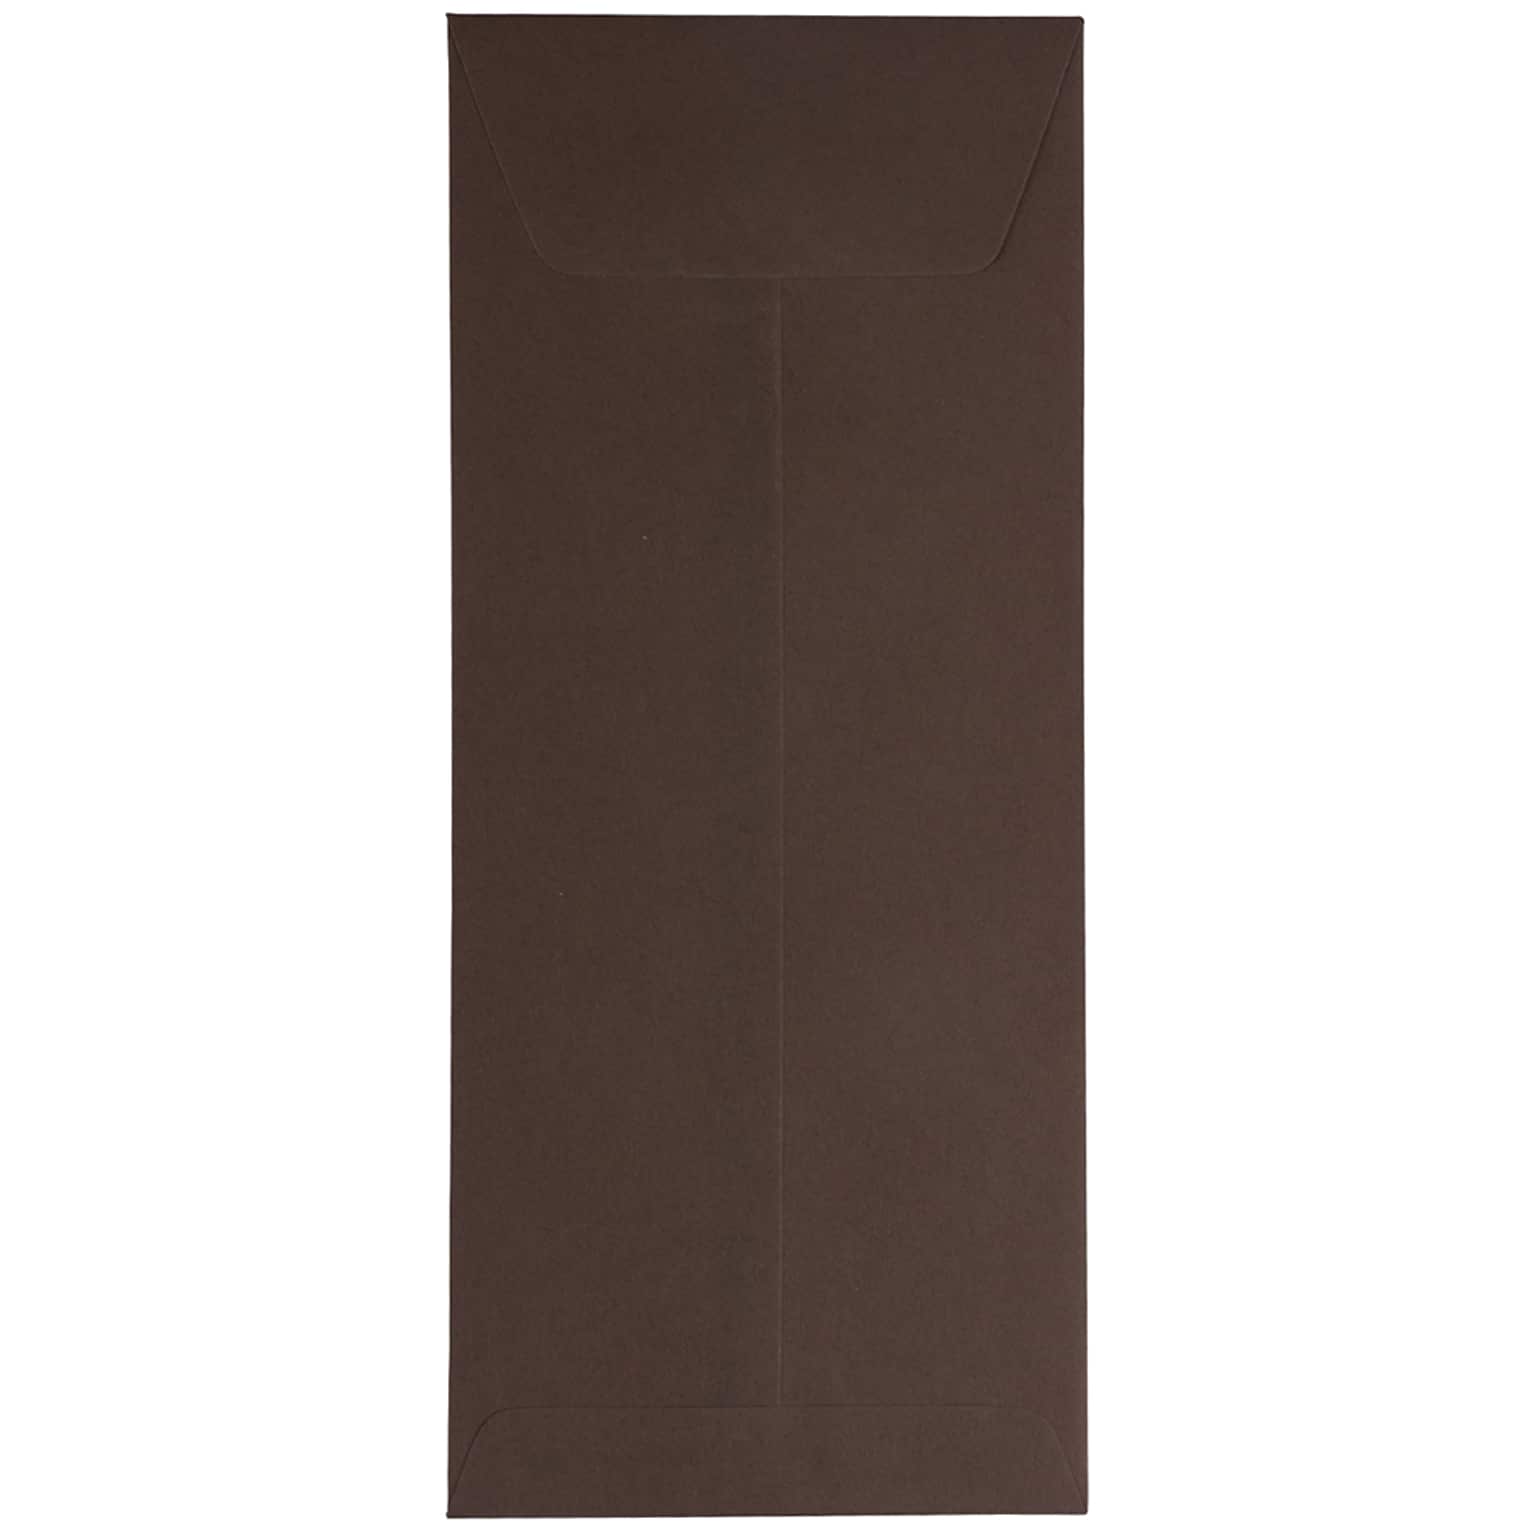 JAM Paper #14 Policy Business Commercial Envelope, 5 x 11 1/2, Chocolate Brown, 50/Pack (90094030I)